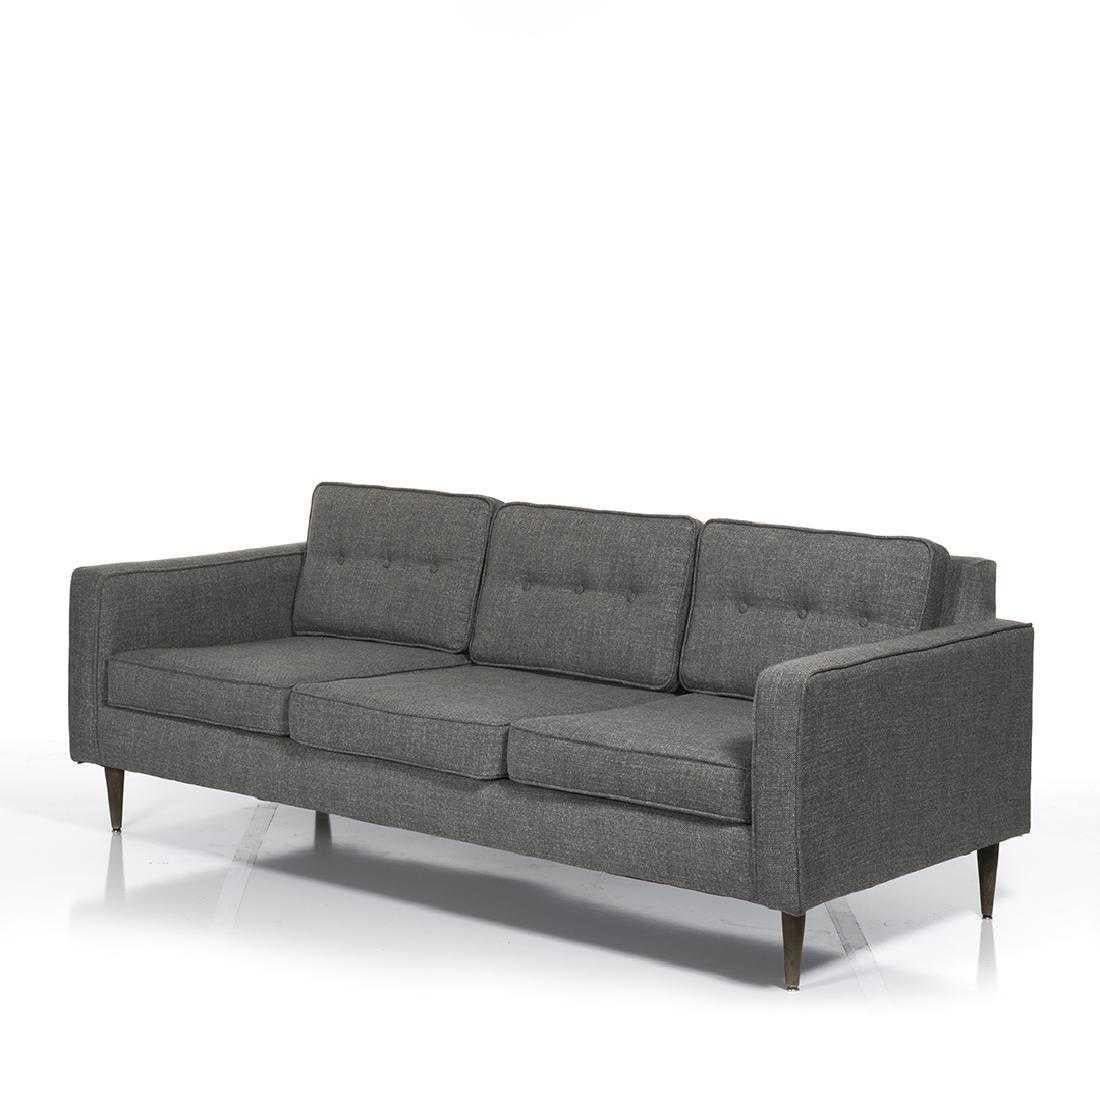 Modernist sofa, 1960s.
Condition
Newly upholstered.
Dimension:
80 x 30 x 33 in.